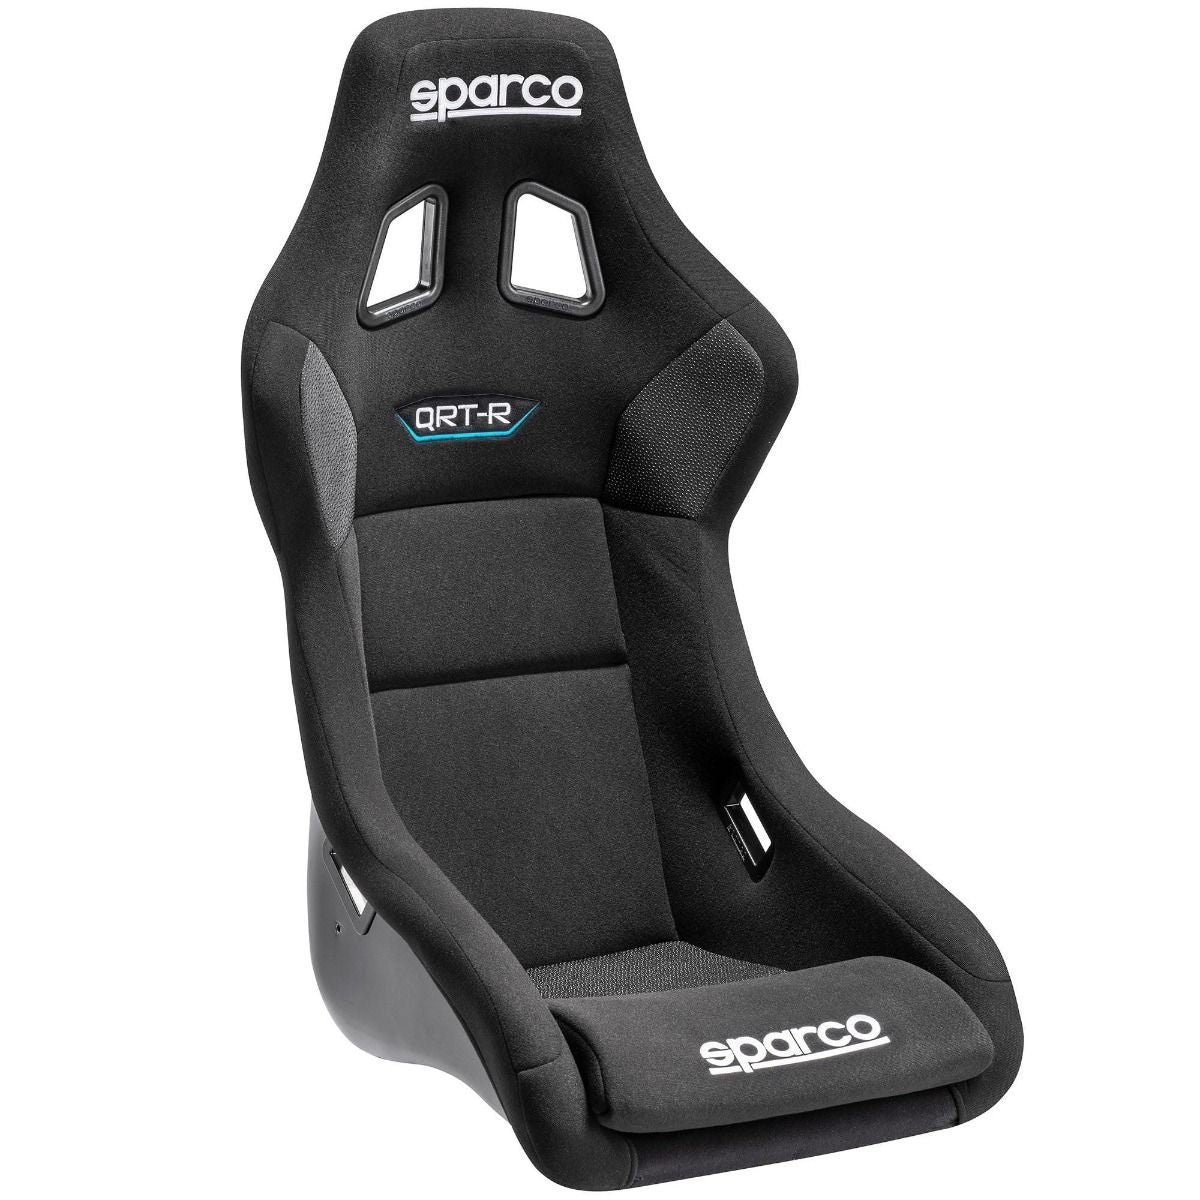 Sparco QRT-R Racing Seat Best deal on sale discounts for the lowest price